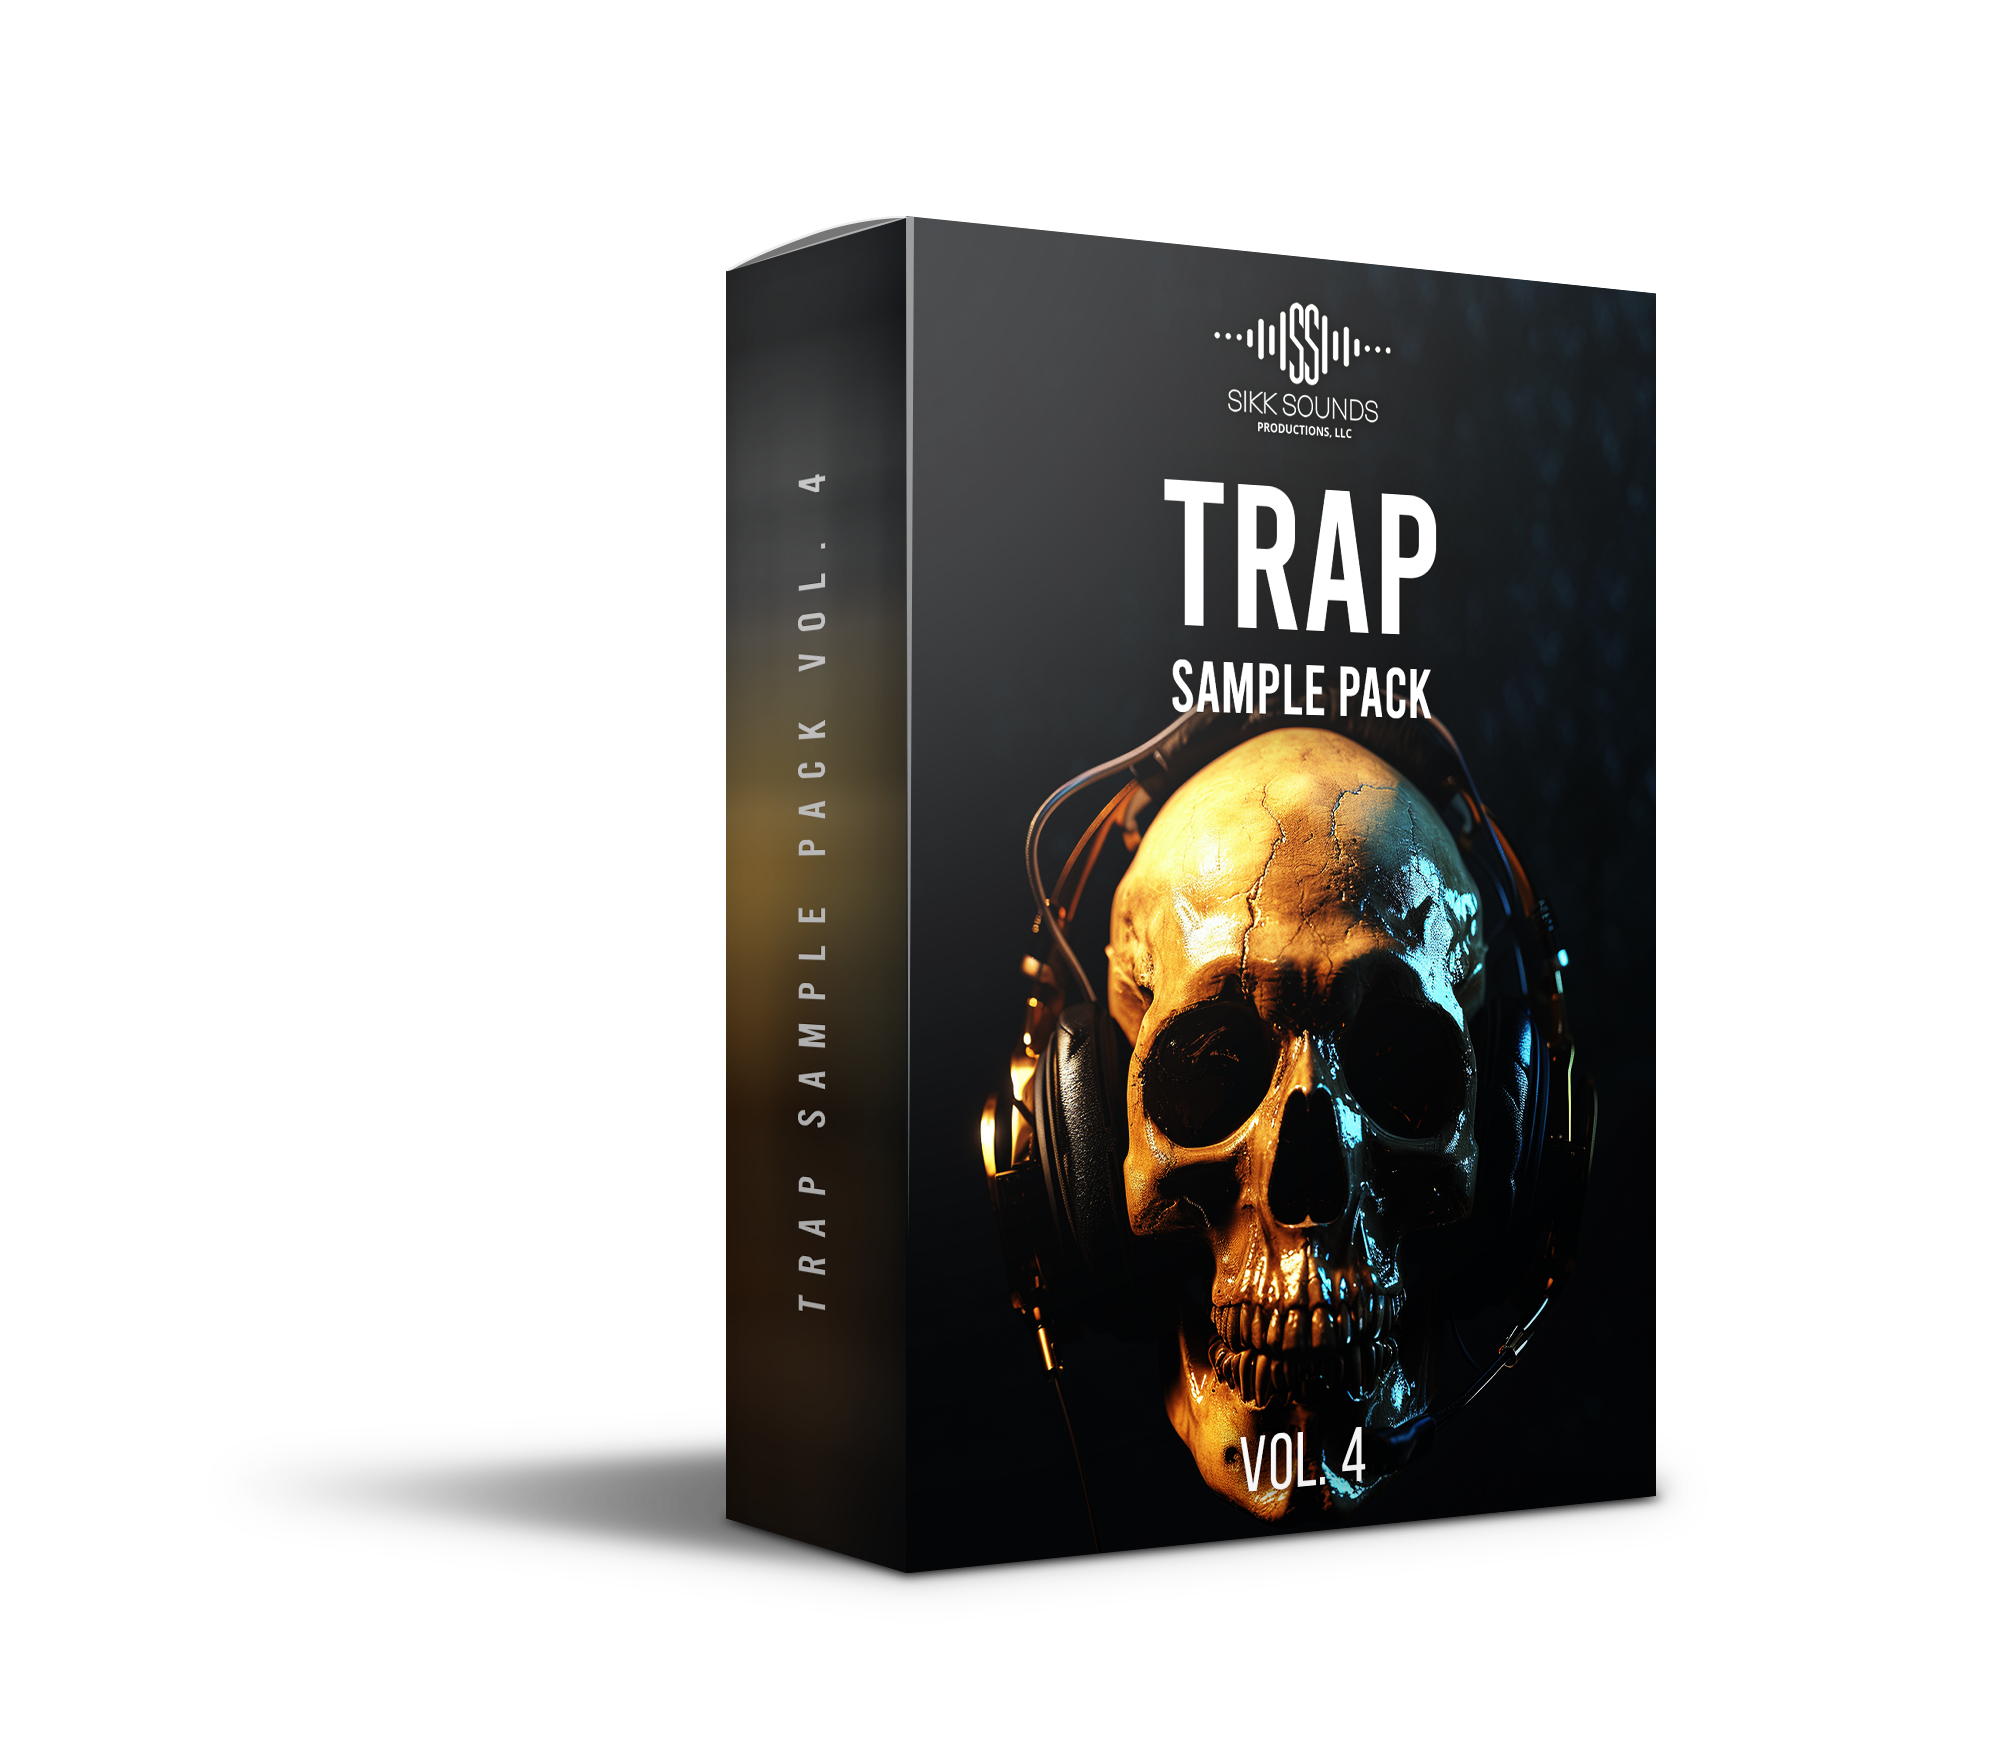 SiKKSounds Trap Sample Pack Vol.4